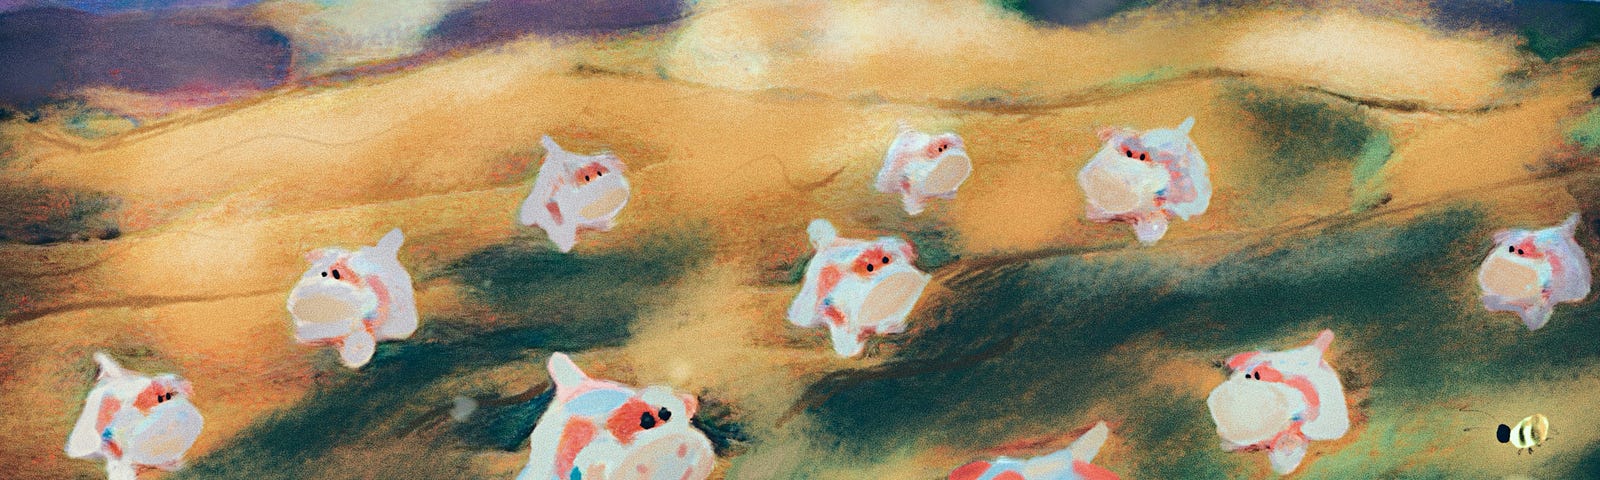 Edris Quinn C’s fanart of Strawberry Cows by Pillowpets. The strawberry cows are grazing in a field.